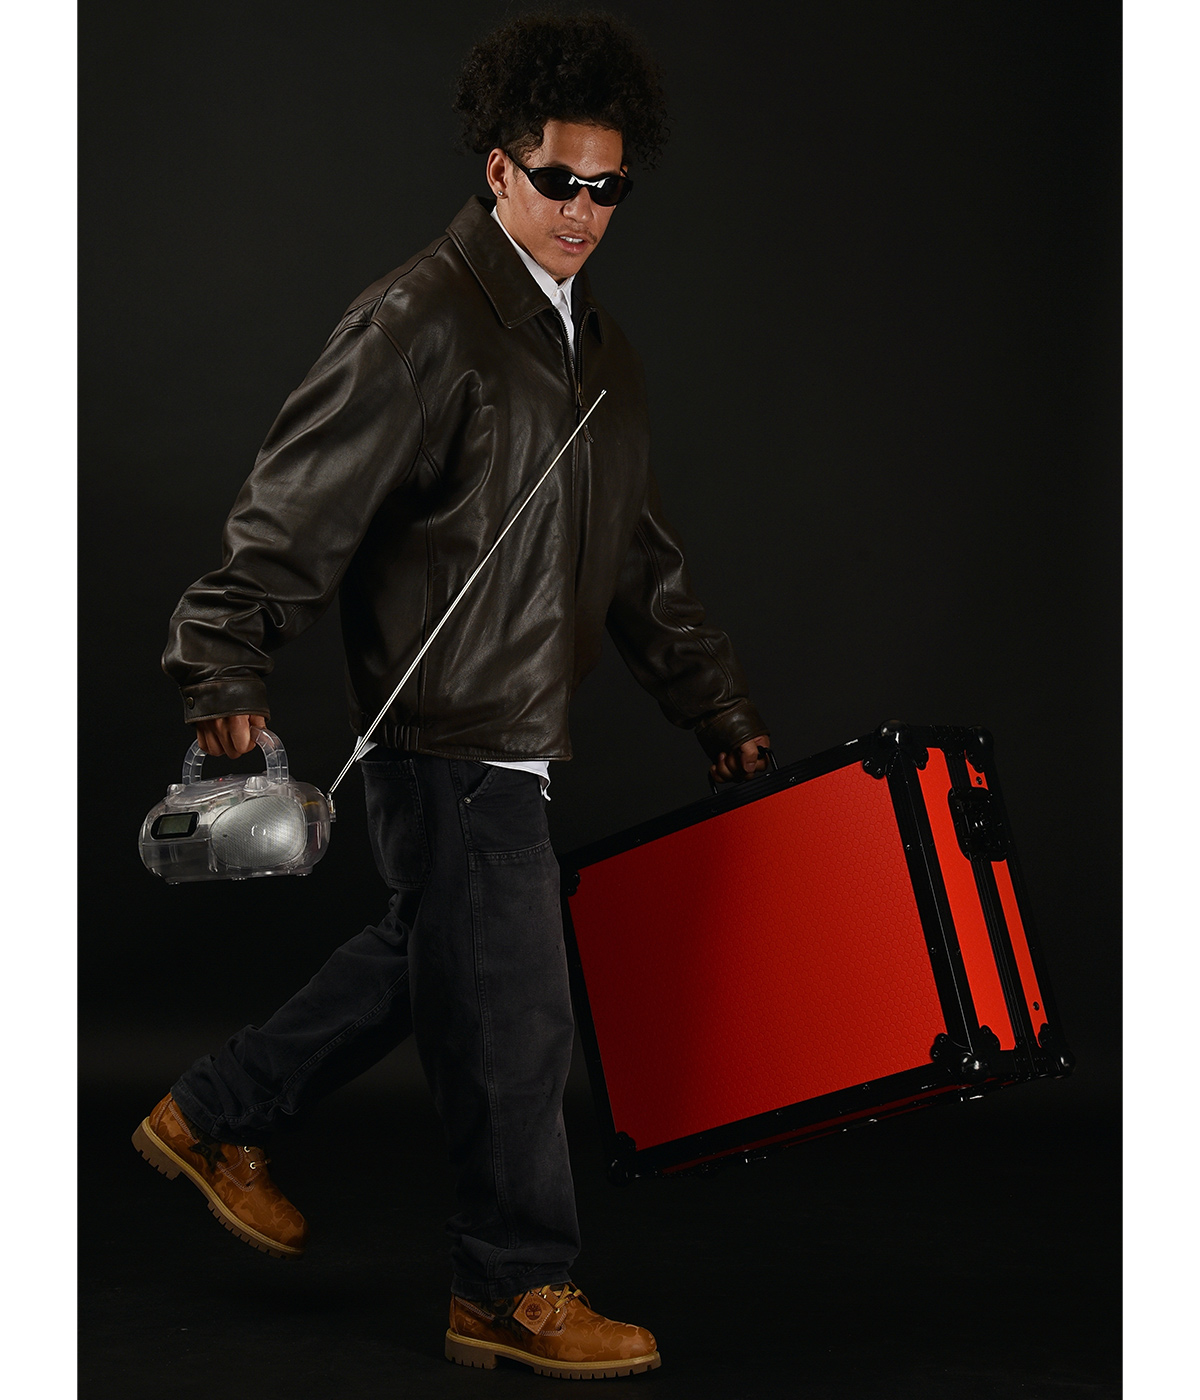 Solomon “DJ Solo” Orr holding a radio and a red briefcase